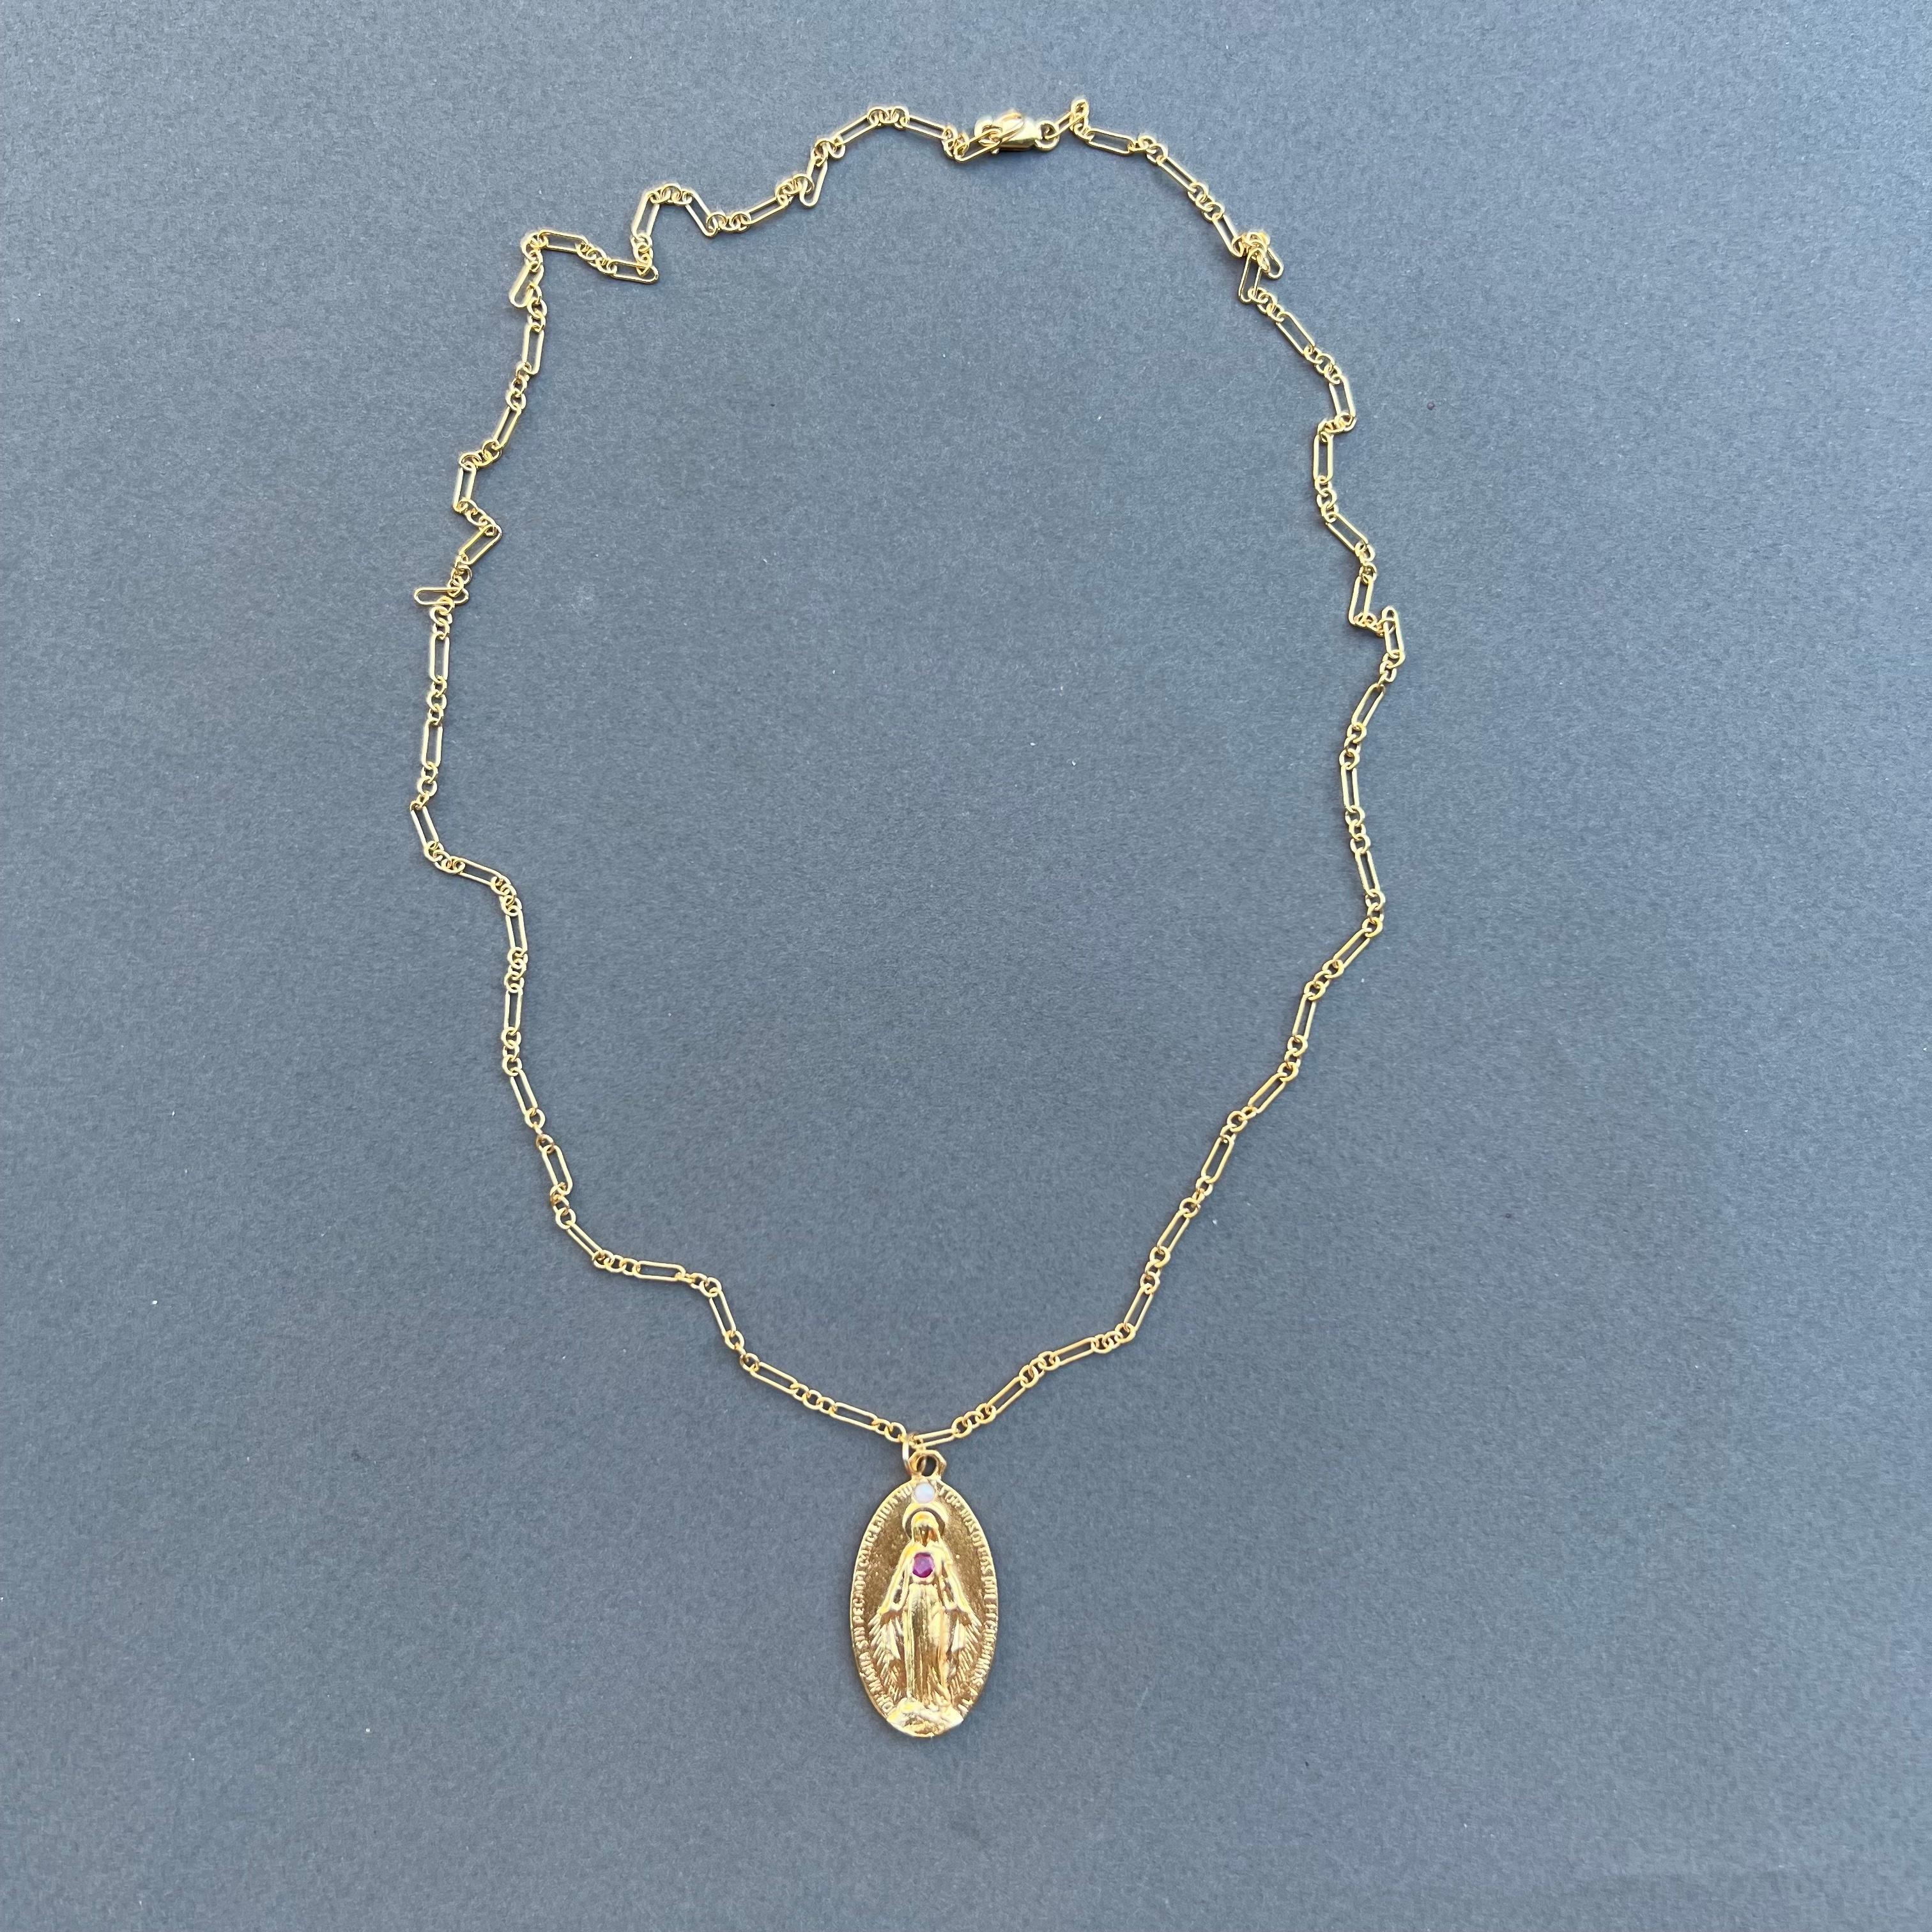 Virgin Mary Ruby Opal Medal Chain Necklace J Dauphin For Sale 5